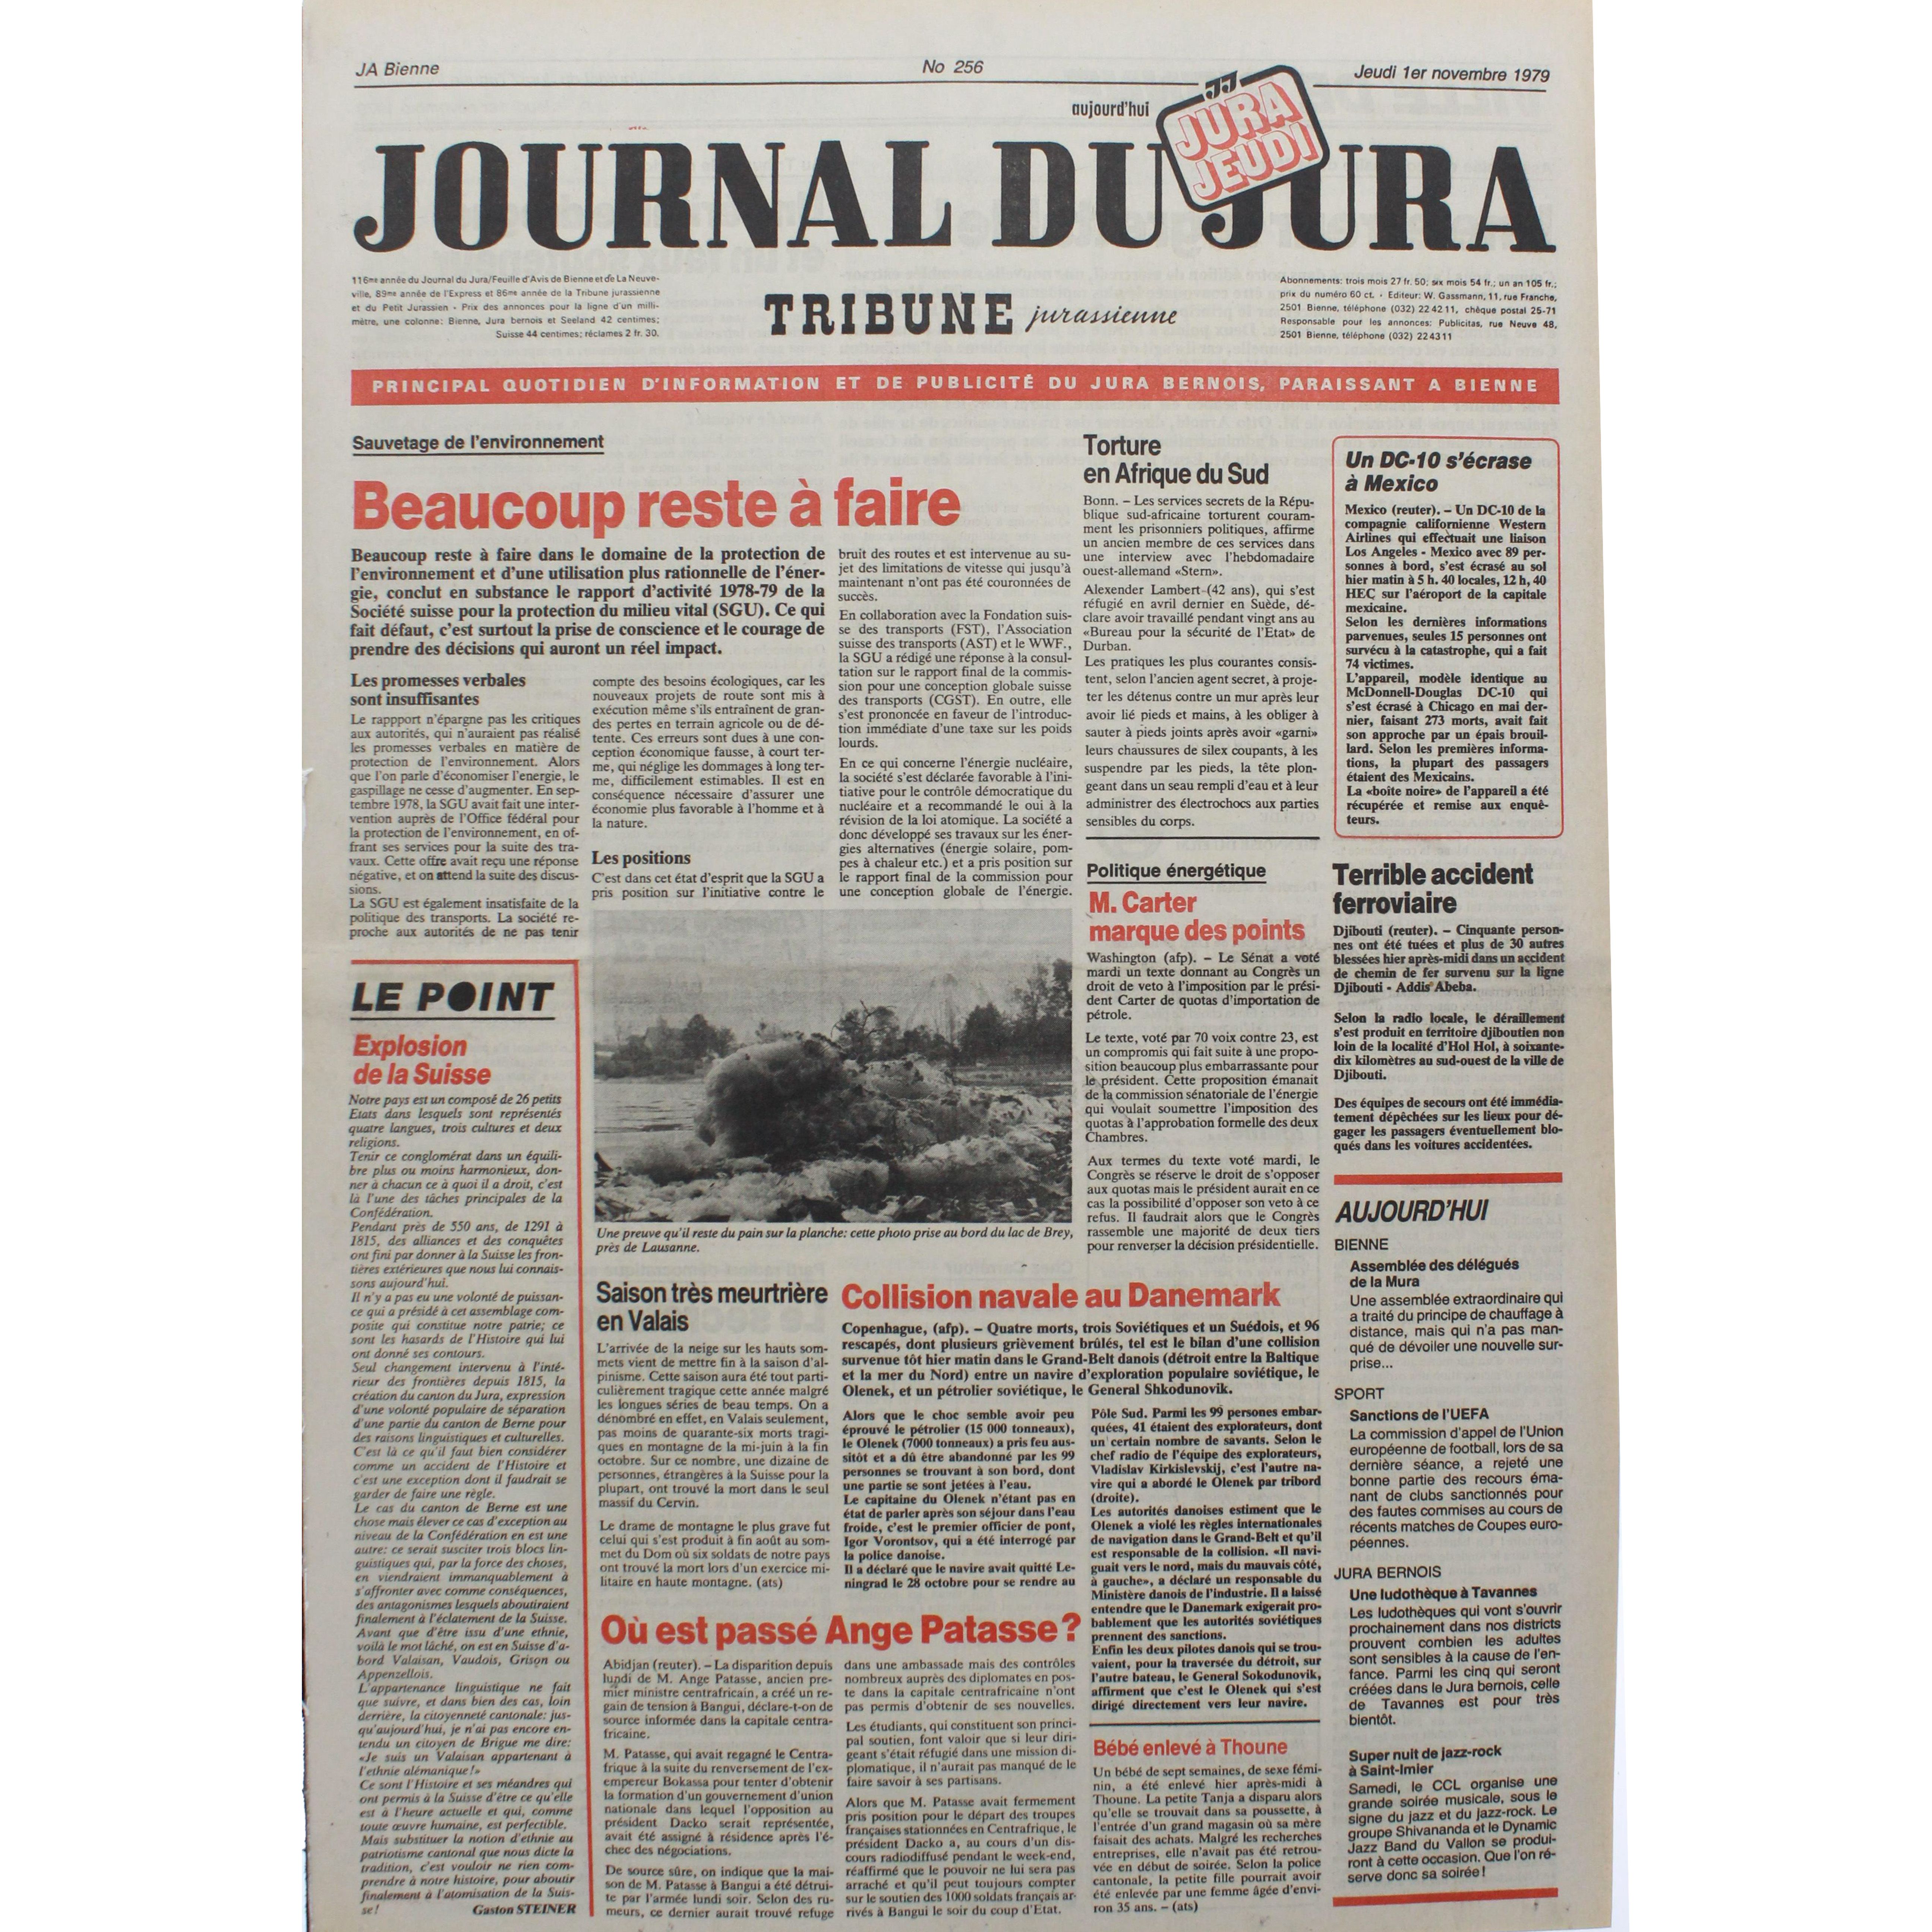 Le Journal du Jura from 1967-10-16 as a gift | Newspaper archive HISTORIA